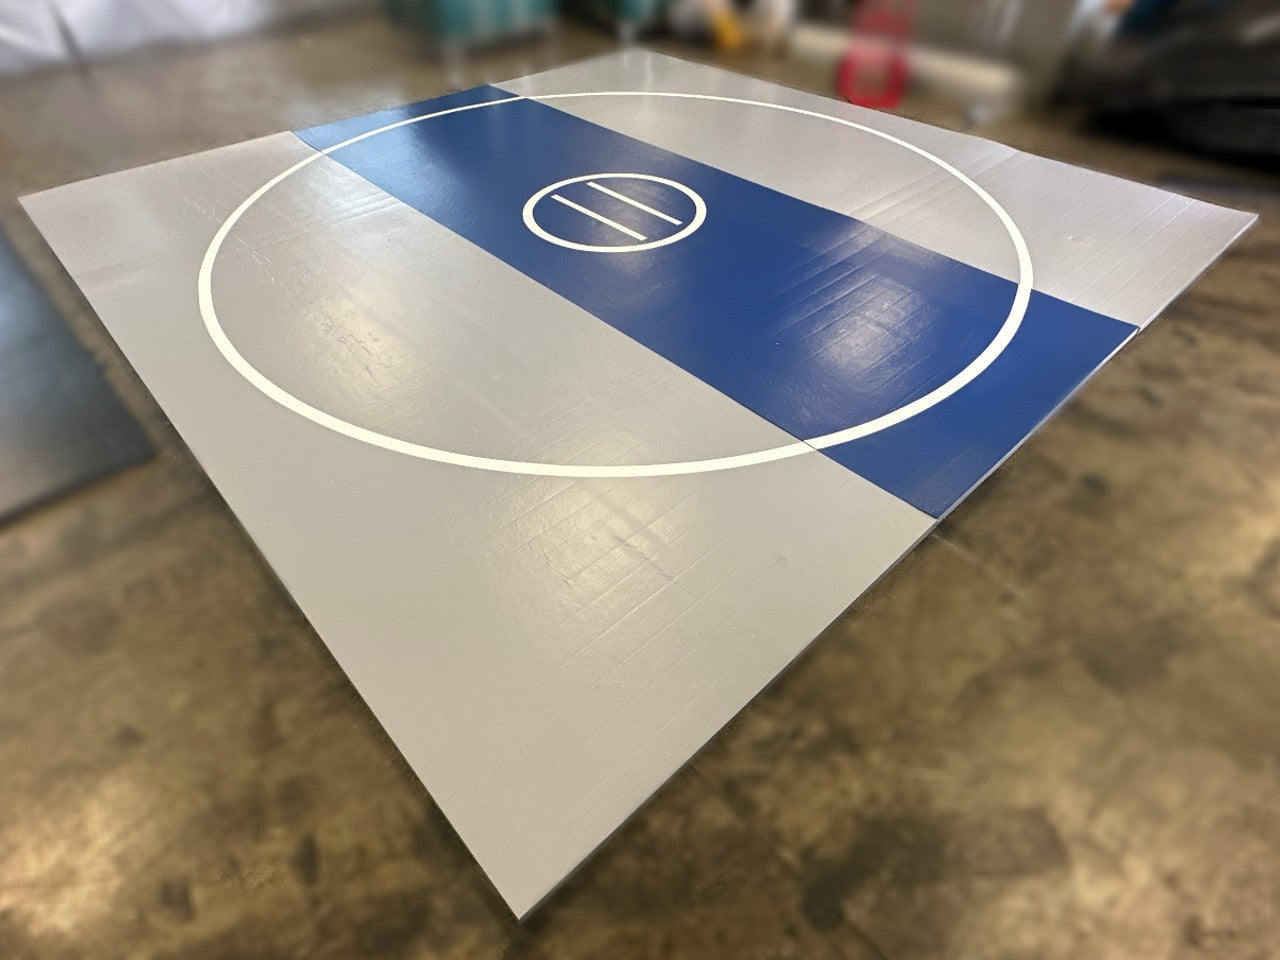 CLEARANCE 16' x 16' x 1 3/8" Roll Up Wrestling Mat - Grey and Blue with White Circles